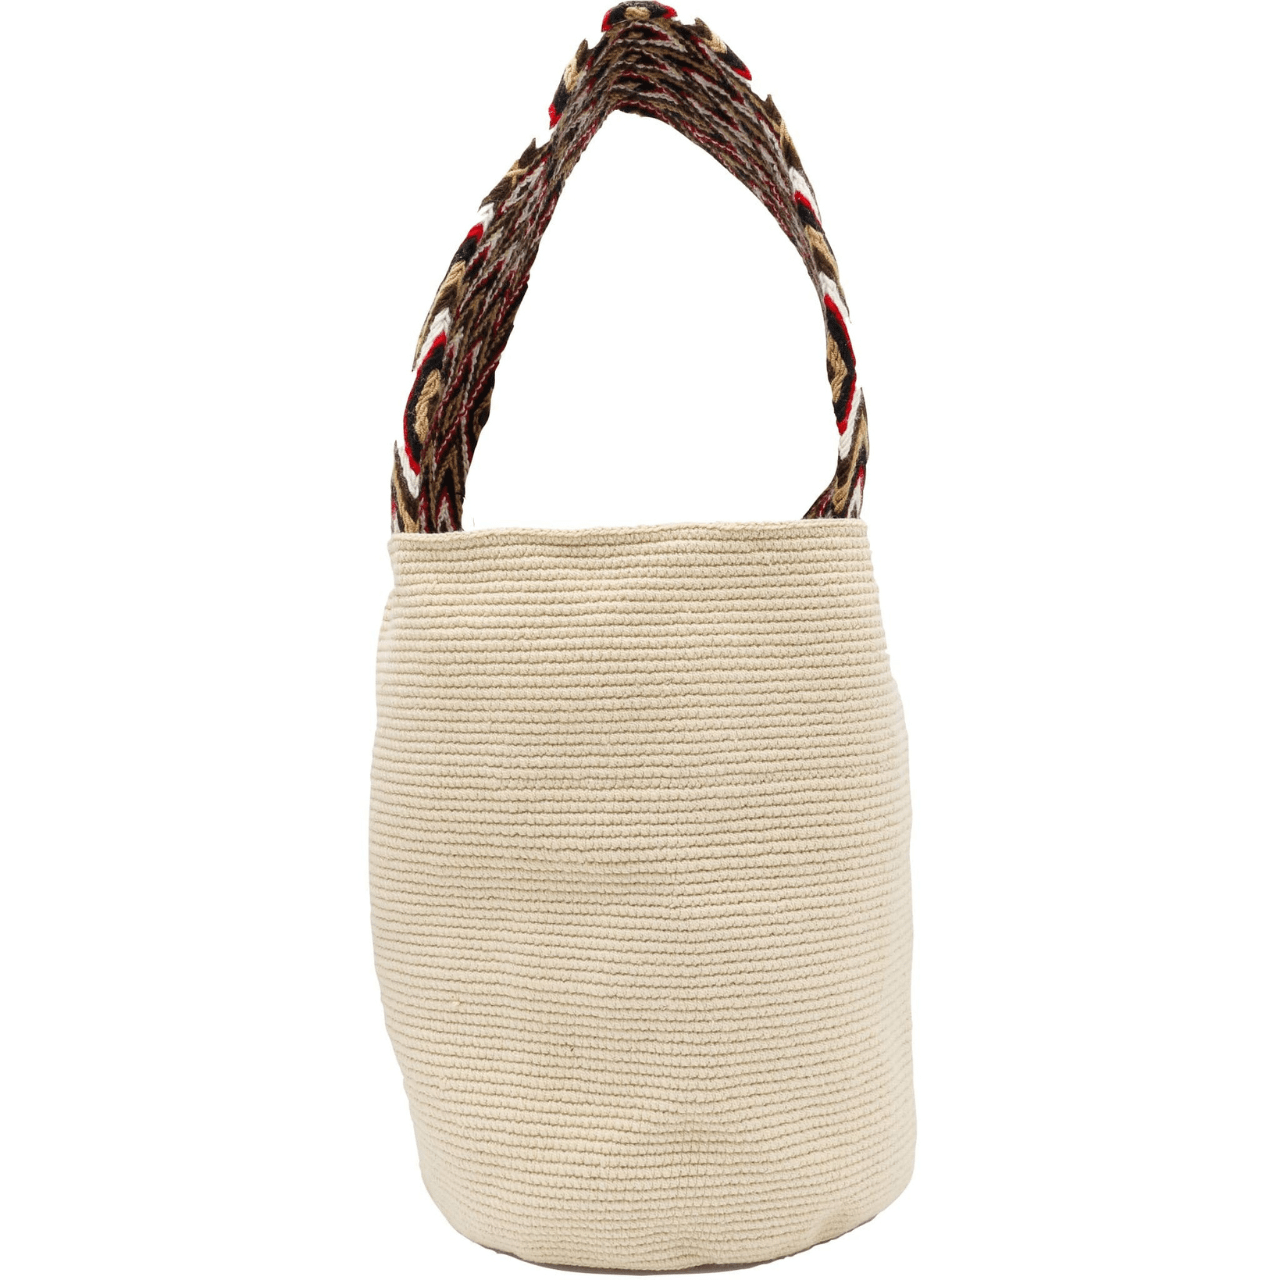 Solid beige  Ece crochet bucket bag with a stunning wide strap in vibrant red, black, and beige hues, adding an elegant touch to the design.